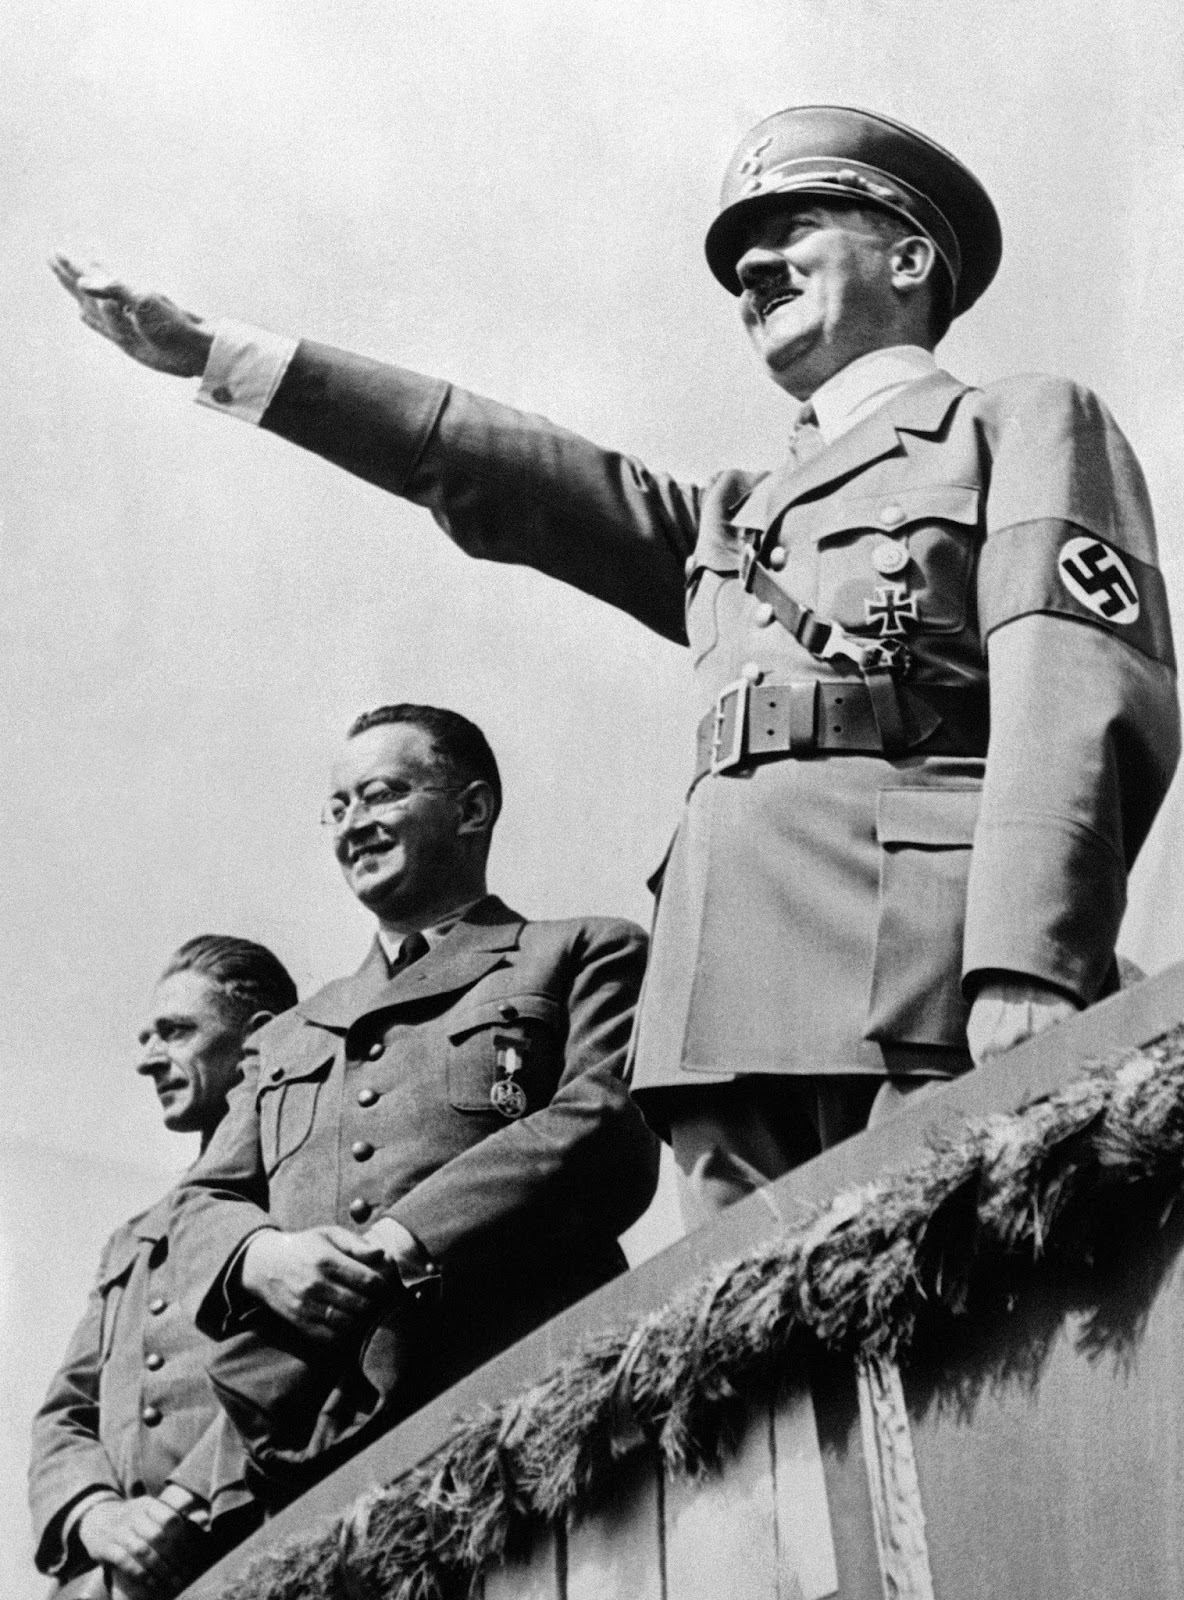 10 Major Mistakes Of World History That Will Make You Forget Yours - The man who didn't shoot Hitler, while he could